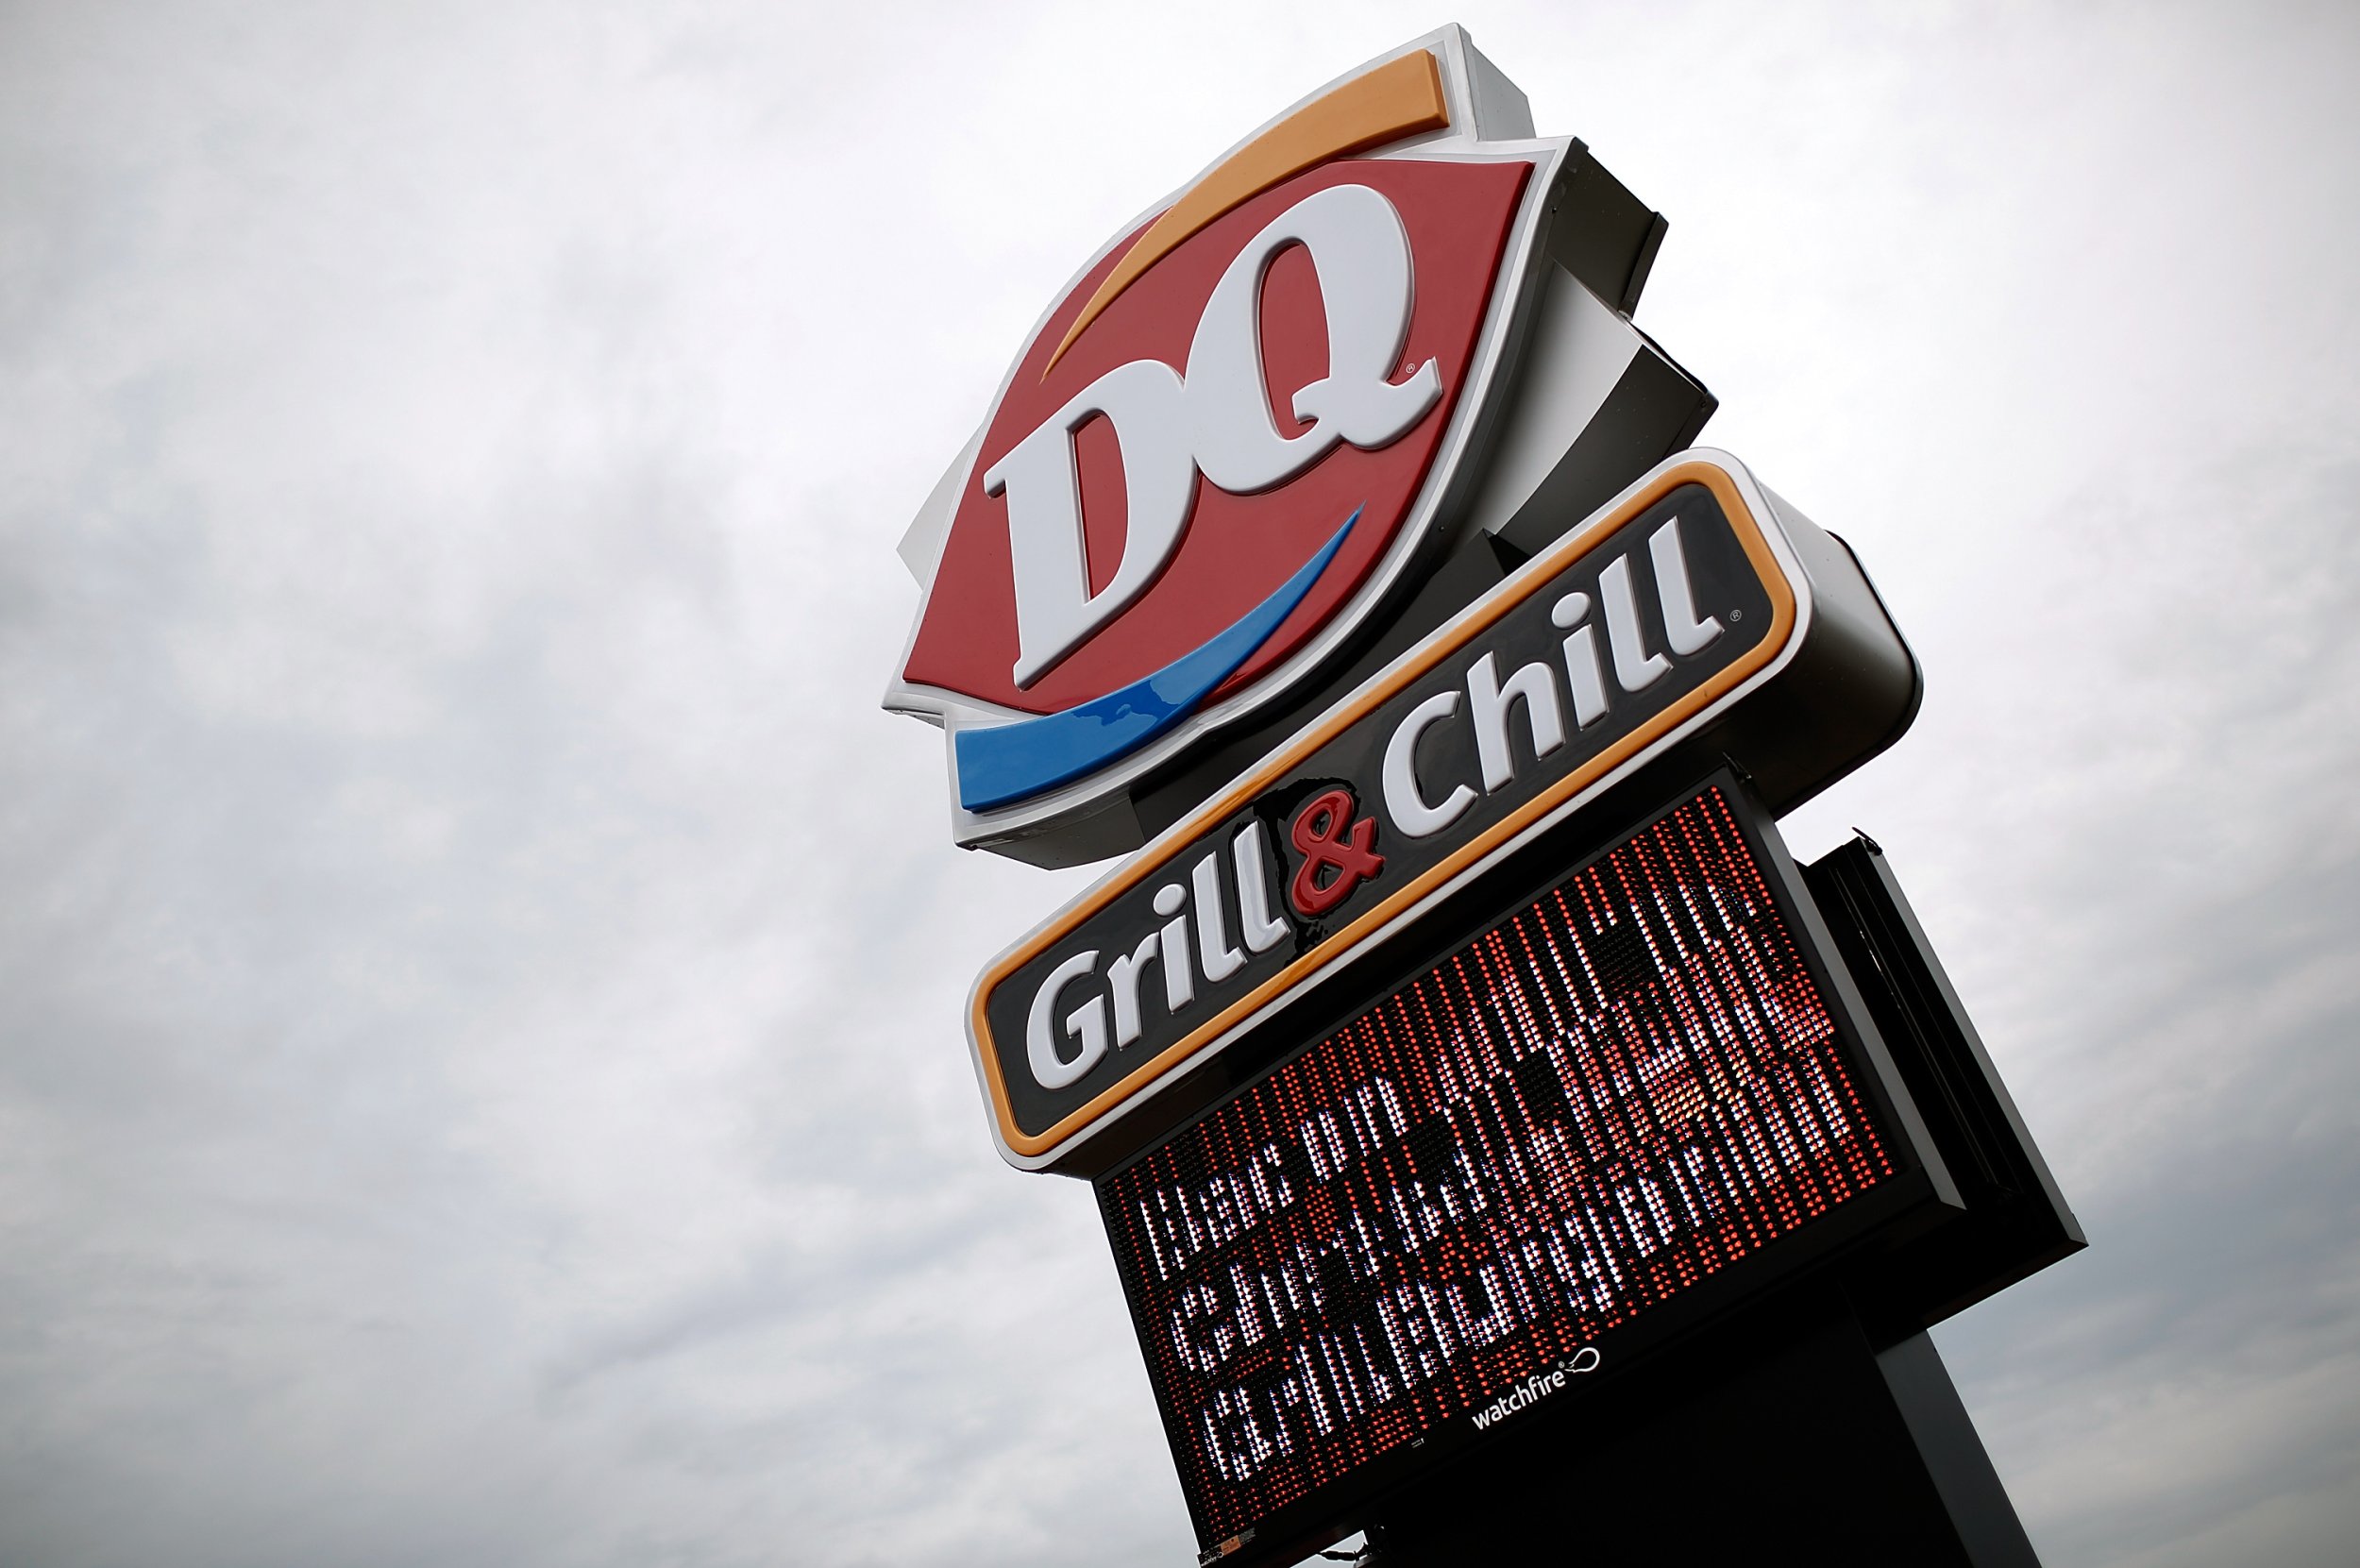 Dairy Queen Free Ice Cream Here's How To Get Your Complimentary Scoop